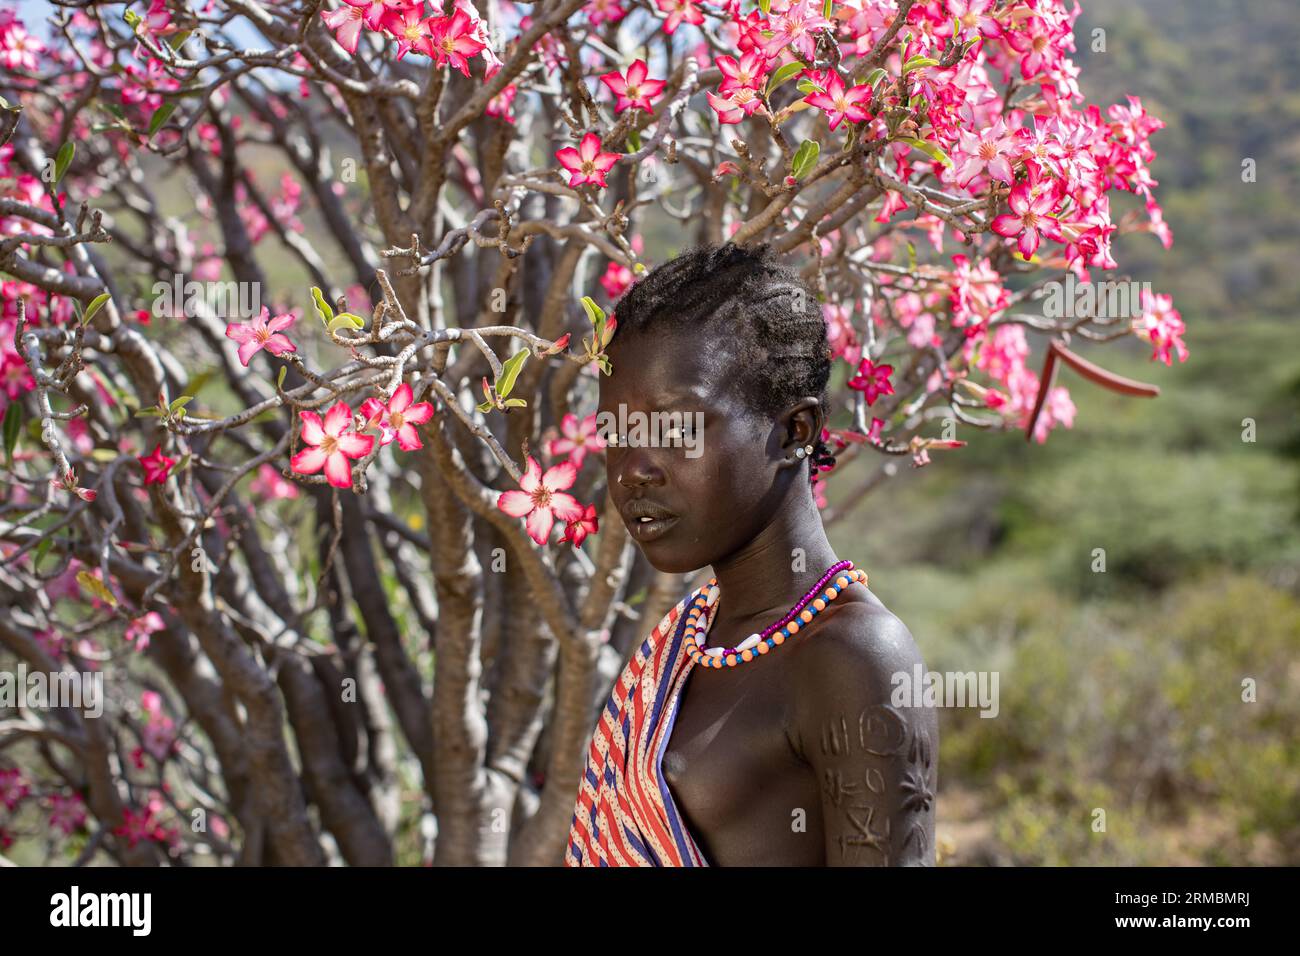 Girl with scars from Larim tribe stands near adenium tree in bloom Stock Photo